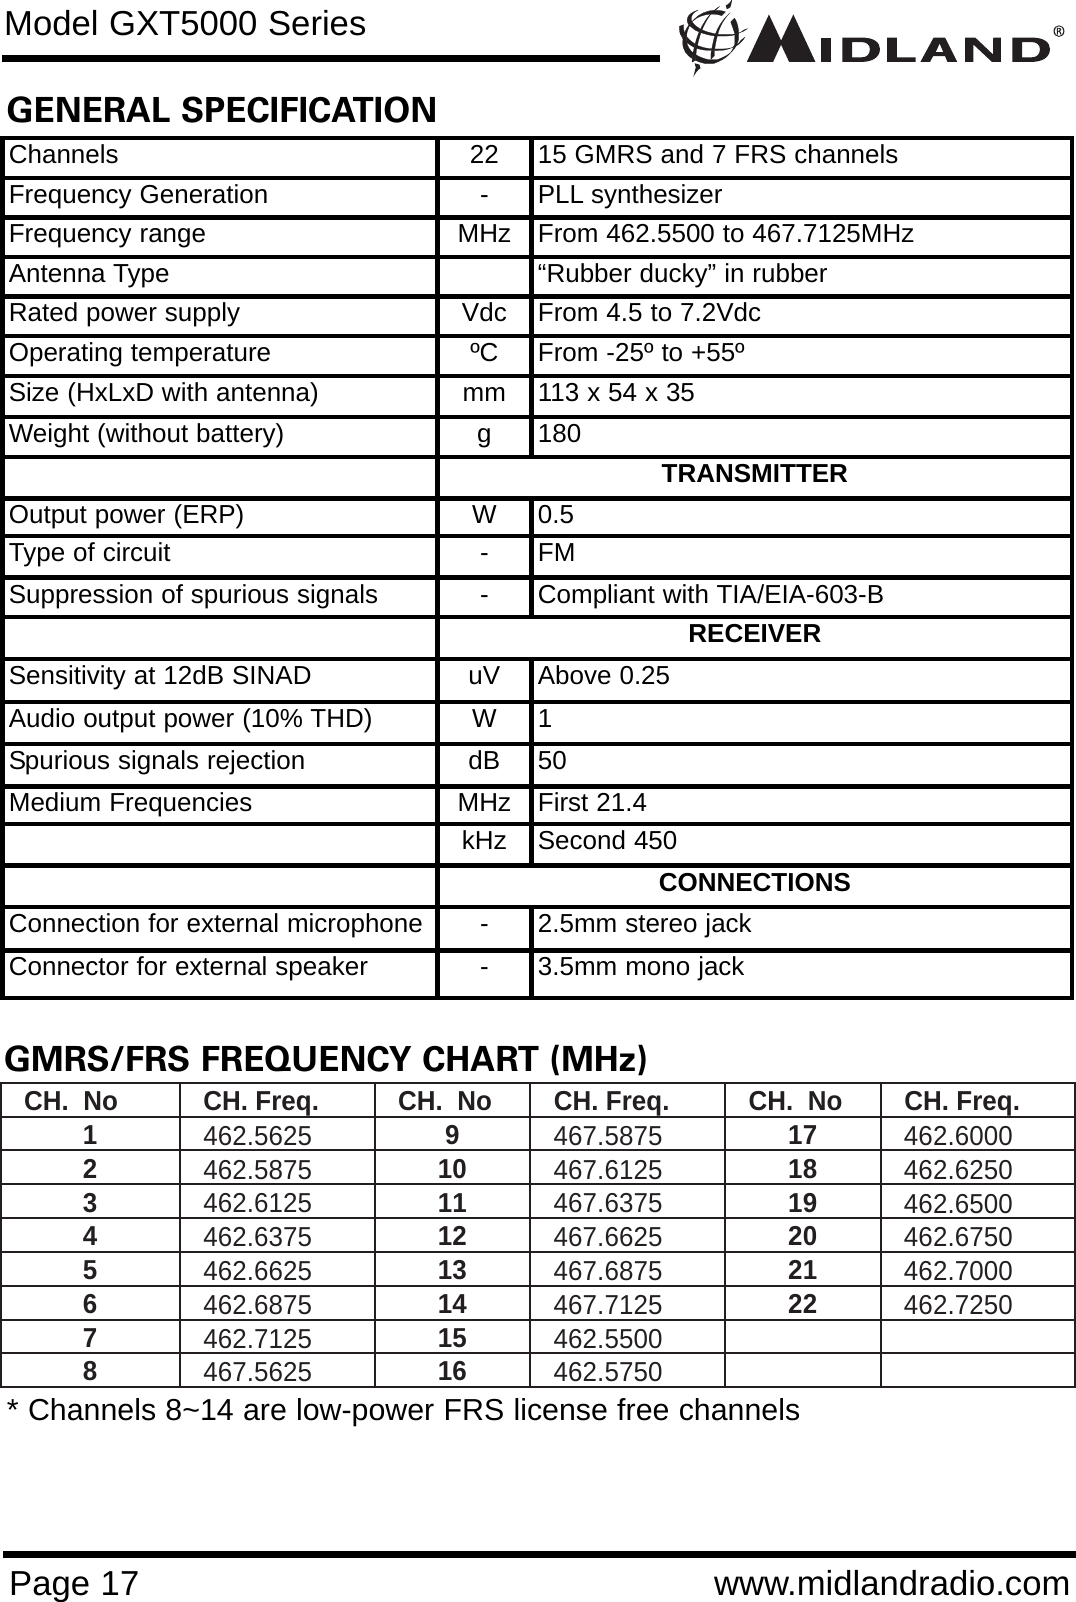 Page 17 www.midlandradio.comModel GXT5000 SeriesGMRS/FRS FREQUENCY CHART (MHz)CH.  No  CH. Freq.  CH.  No  CH. Freq.  CH.  No  CH. Freq. 1  462.5625 9  467.5875 17  462.6000 2  462.5875 10  467.6125 18  462.6250 3  462.6125 11  467.6375 19  462.6500 4  462.6375 12  467.6625 20  462.6750 5  462.6625 13  467.6875 21  462.7000 6  462.6875 14  467.7125 22  462.7250 7  462.7125 15  462.5500   8  467.5625 16  462.5750   * Channels 8~14 are low-power FRS license free channelsGENERAL SPECIFICATIONChannels 22 15 GMRS and 7 FRS channelsFrequency Generation - PLL synthesizerFrequency range MHz From 462.5500 to 467.7125MHzAntenna Type “Rubber ducky” in rubberRated power supply Vdc From 4.5 to 7.2VdcOperating temperature ºC From -25º to +55ºSize (HxLxD with antenna) mm 113 x 54 x 35Weight (without battery) g 180TRANSMITTEROutput power (ERP) W 0.5Type of circuit - FMSuppression of spurious signals -Compliant with TIA/EIA-603-BRECEIVERSensitivity at 12dB SINAD uV Above 0.25Audio output power (10% THD) W 1Spurious signals rejection dB 50Medium Frequencies MHz First 21.4kHz Second 450CONNECTIONSConnection for external microphone -2.5mm stereo jackConnector for external speaker -3.5mm mono jack